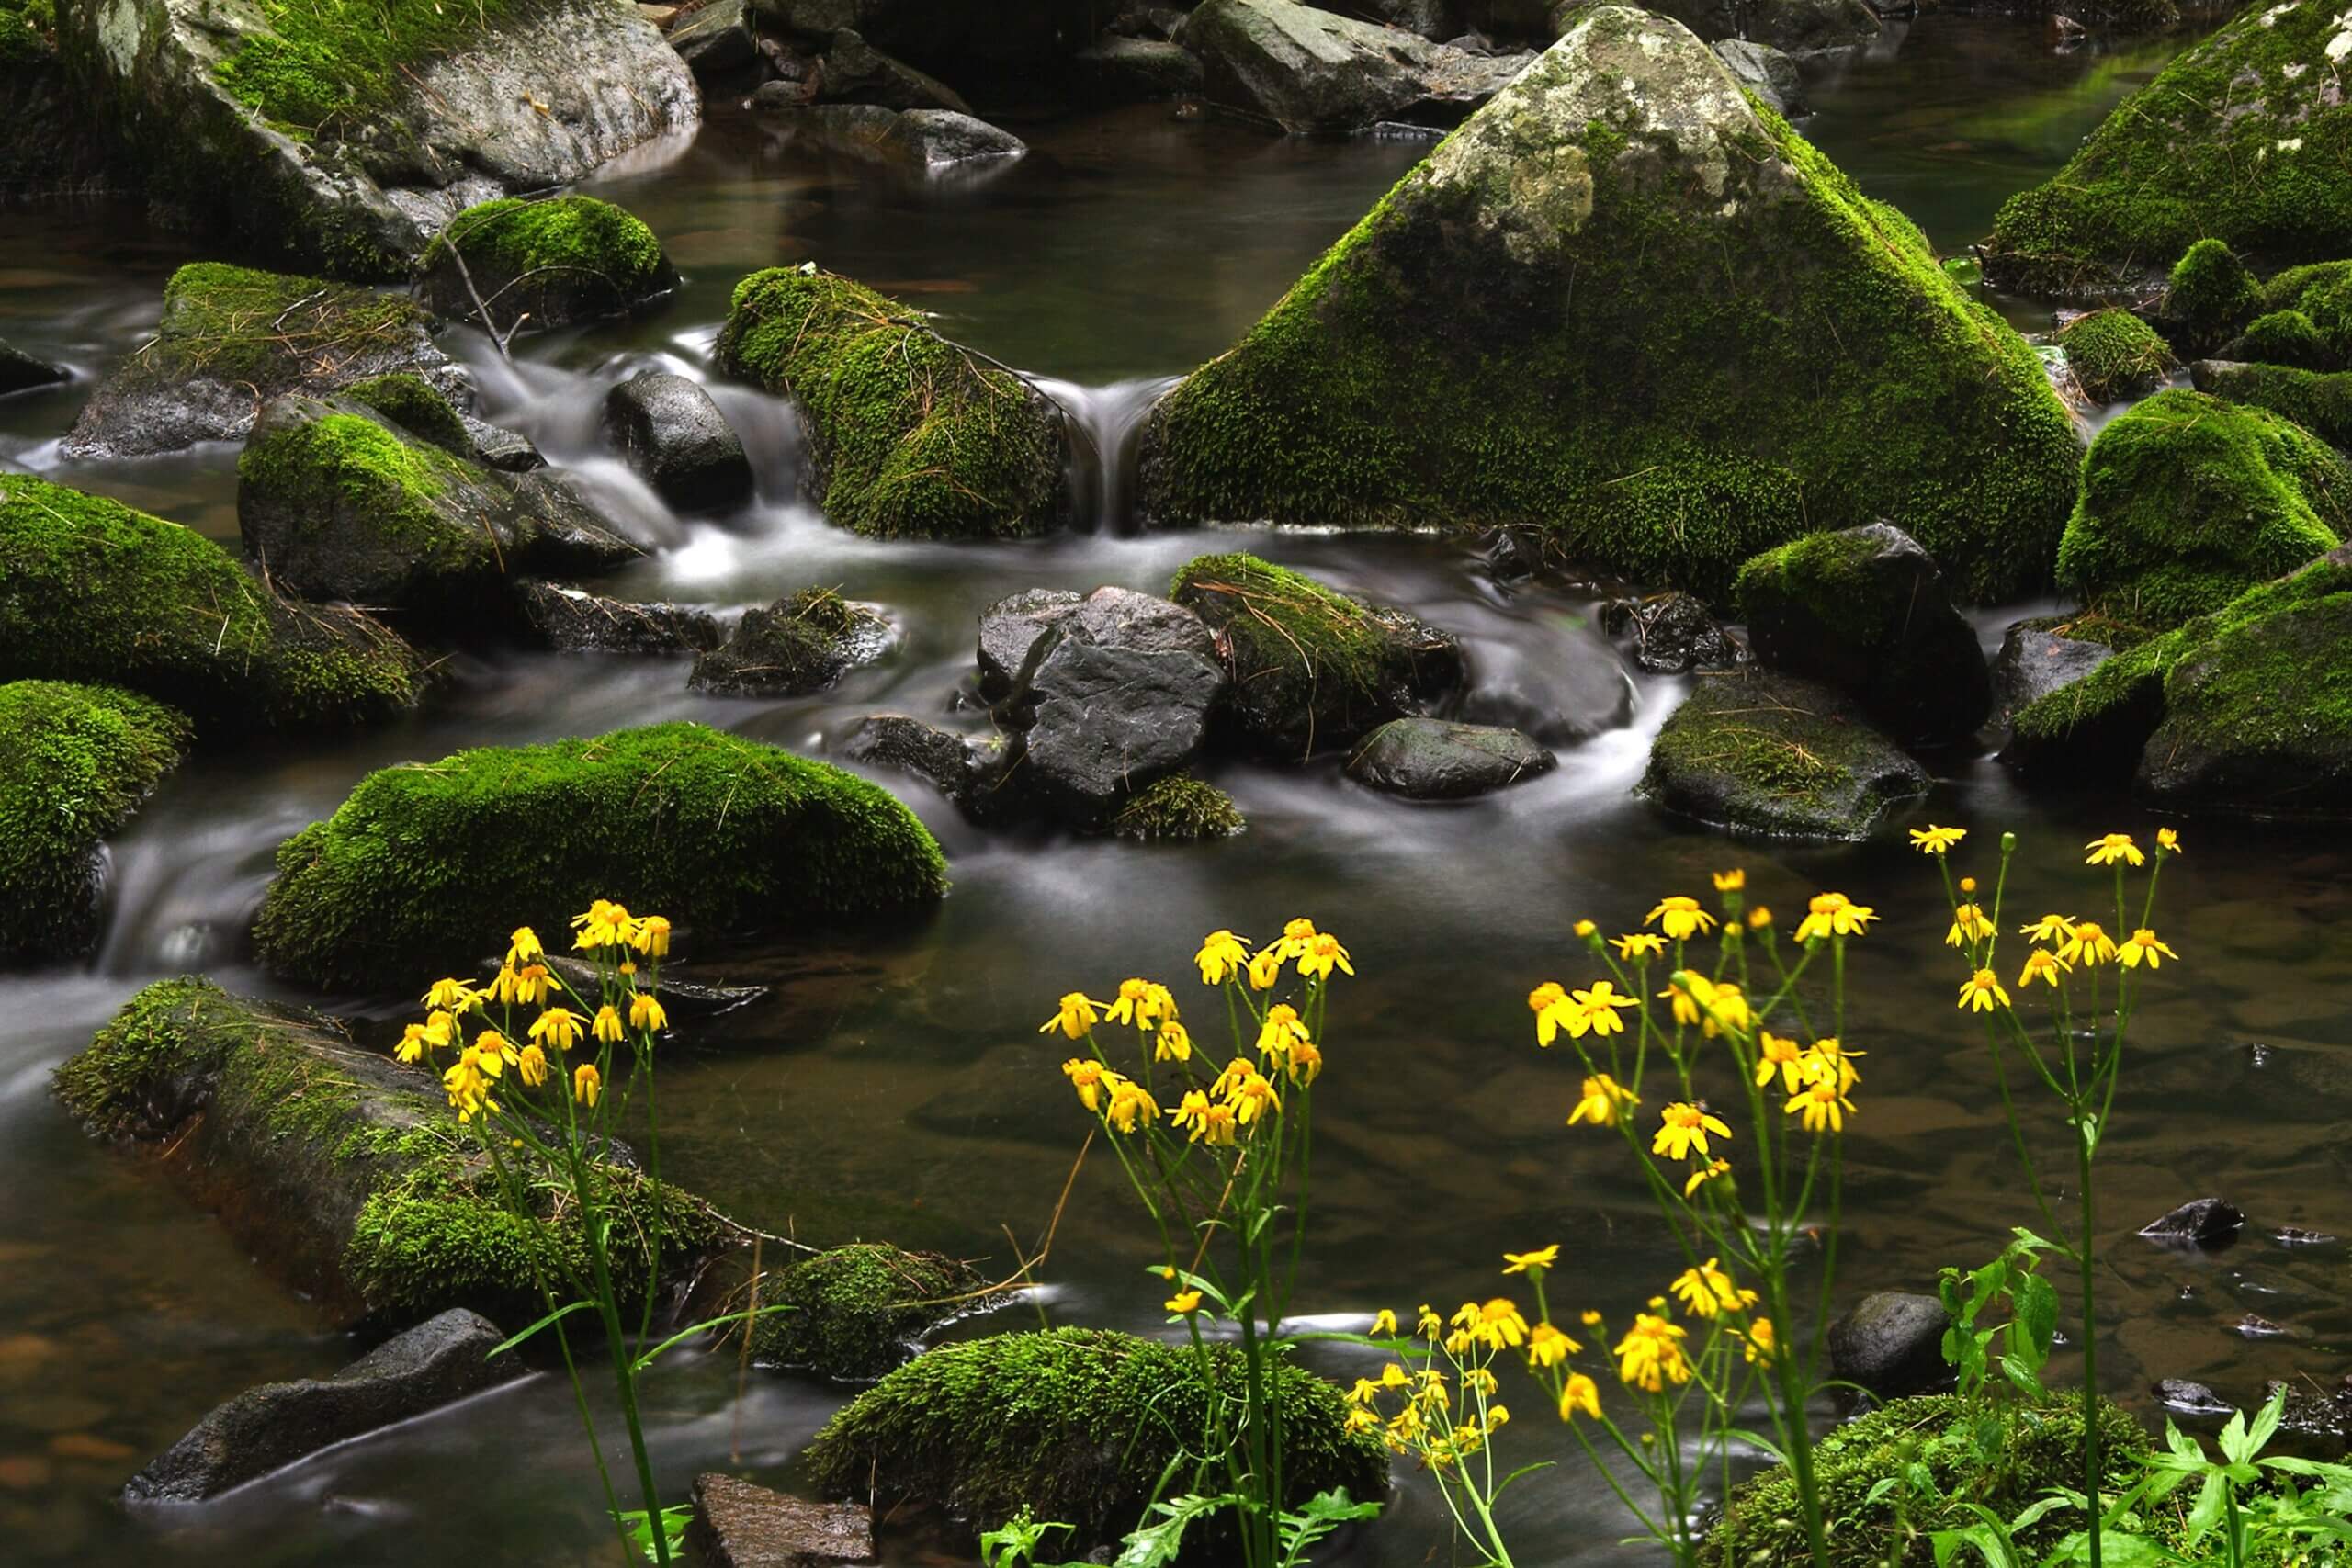 Flowers and moss-covered rocks along a stream at Baxter's Hollow.